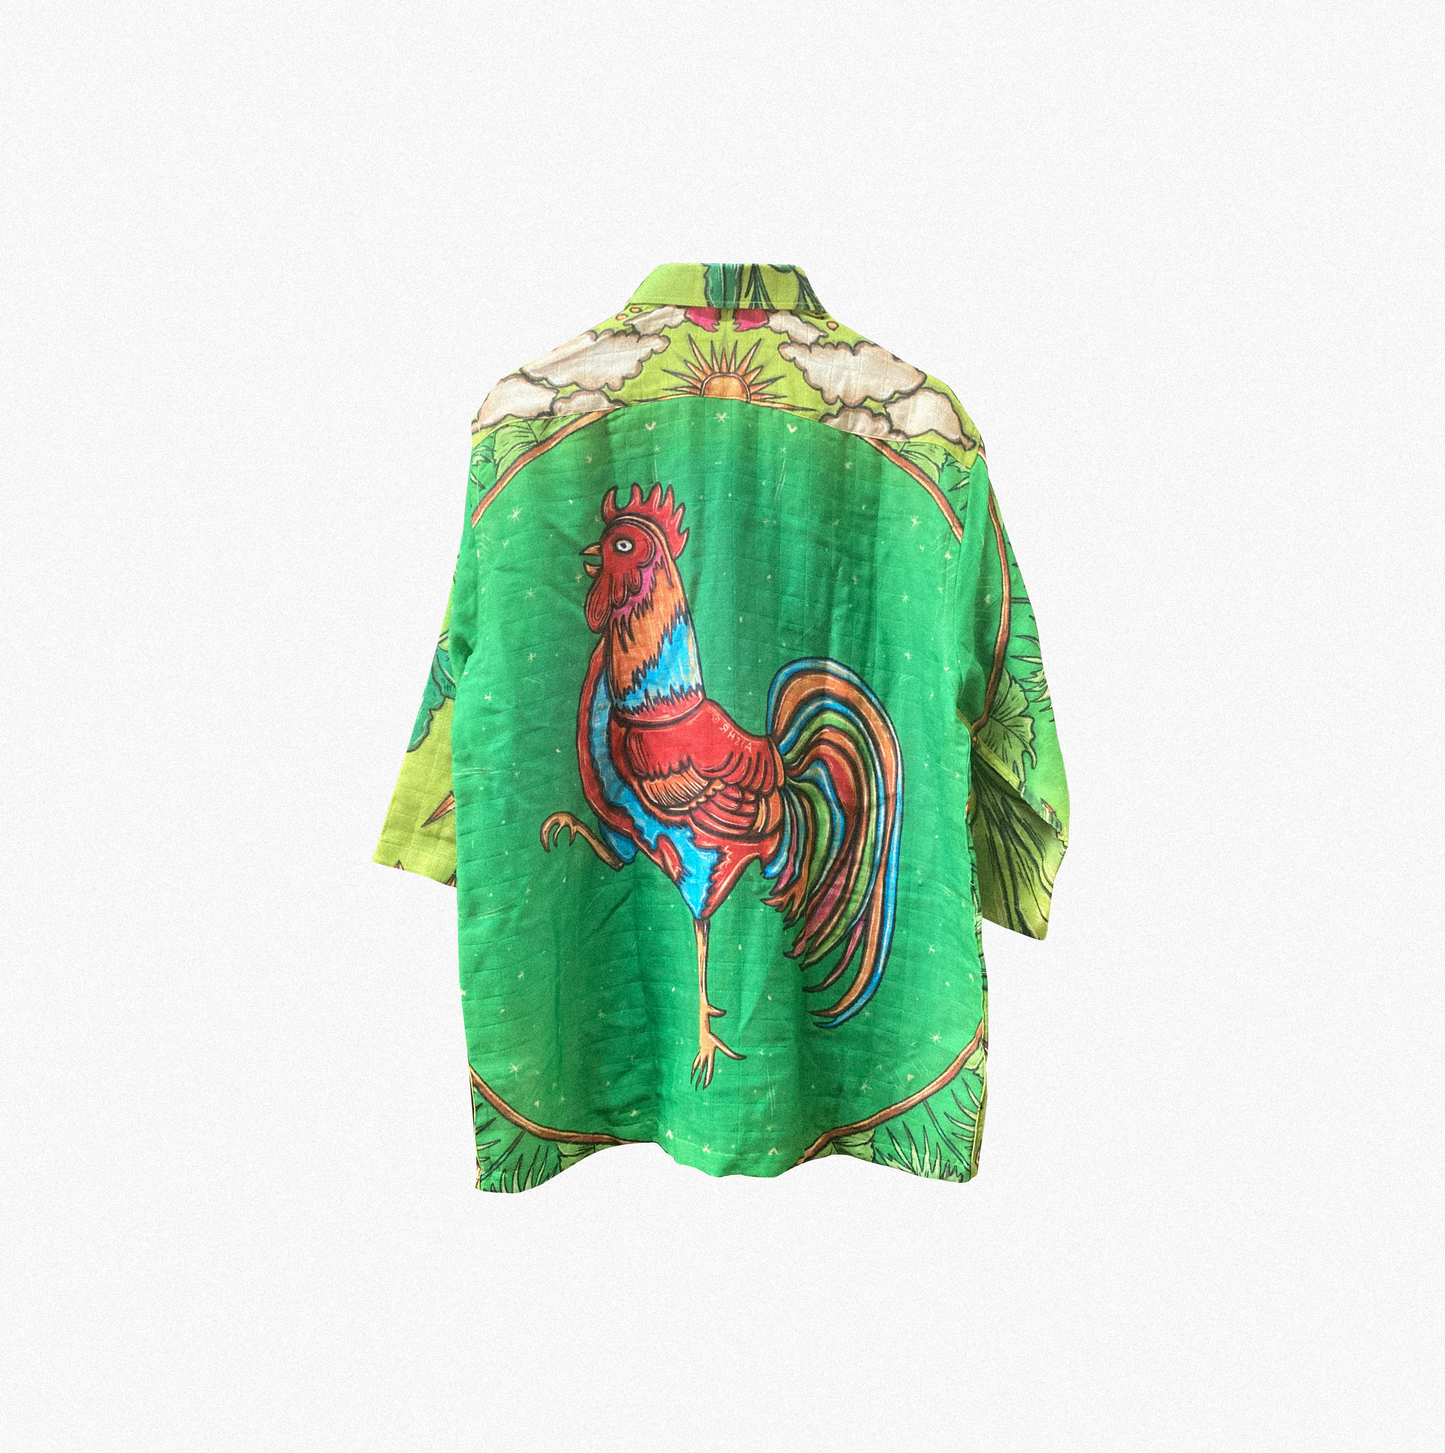 Rooster Shirt - Unisex